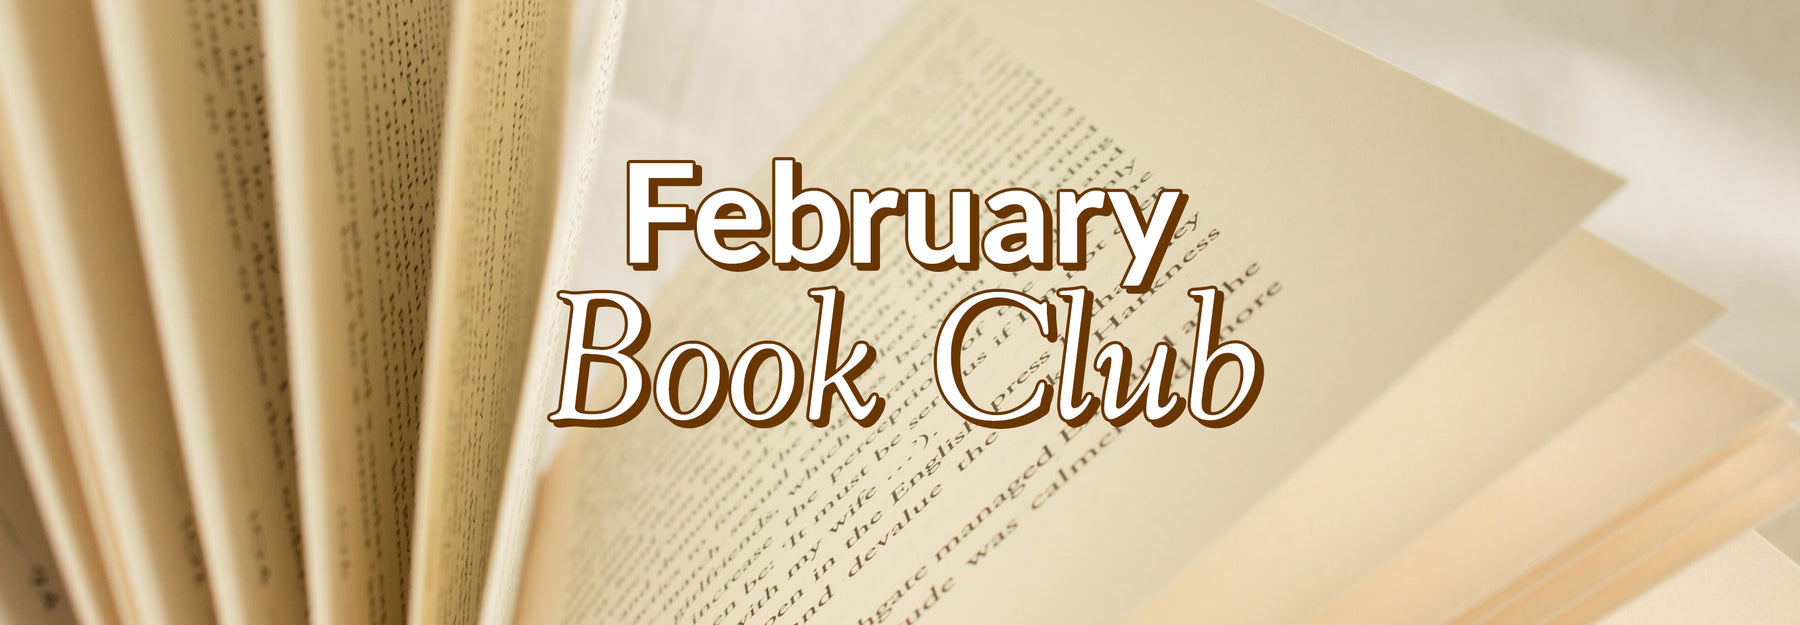 February book club recommendations